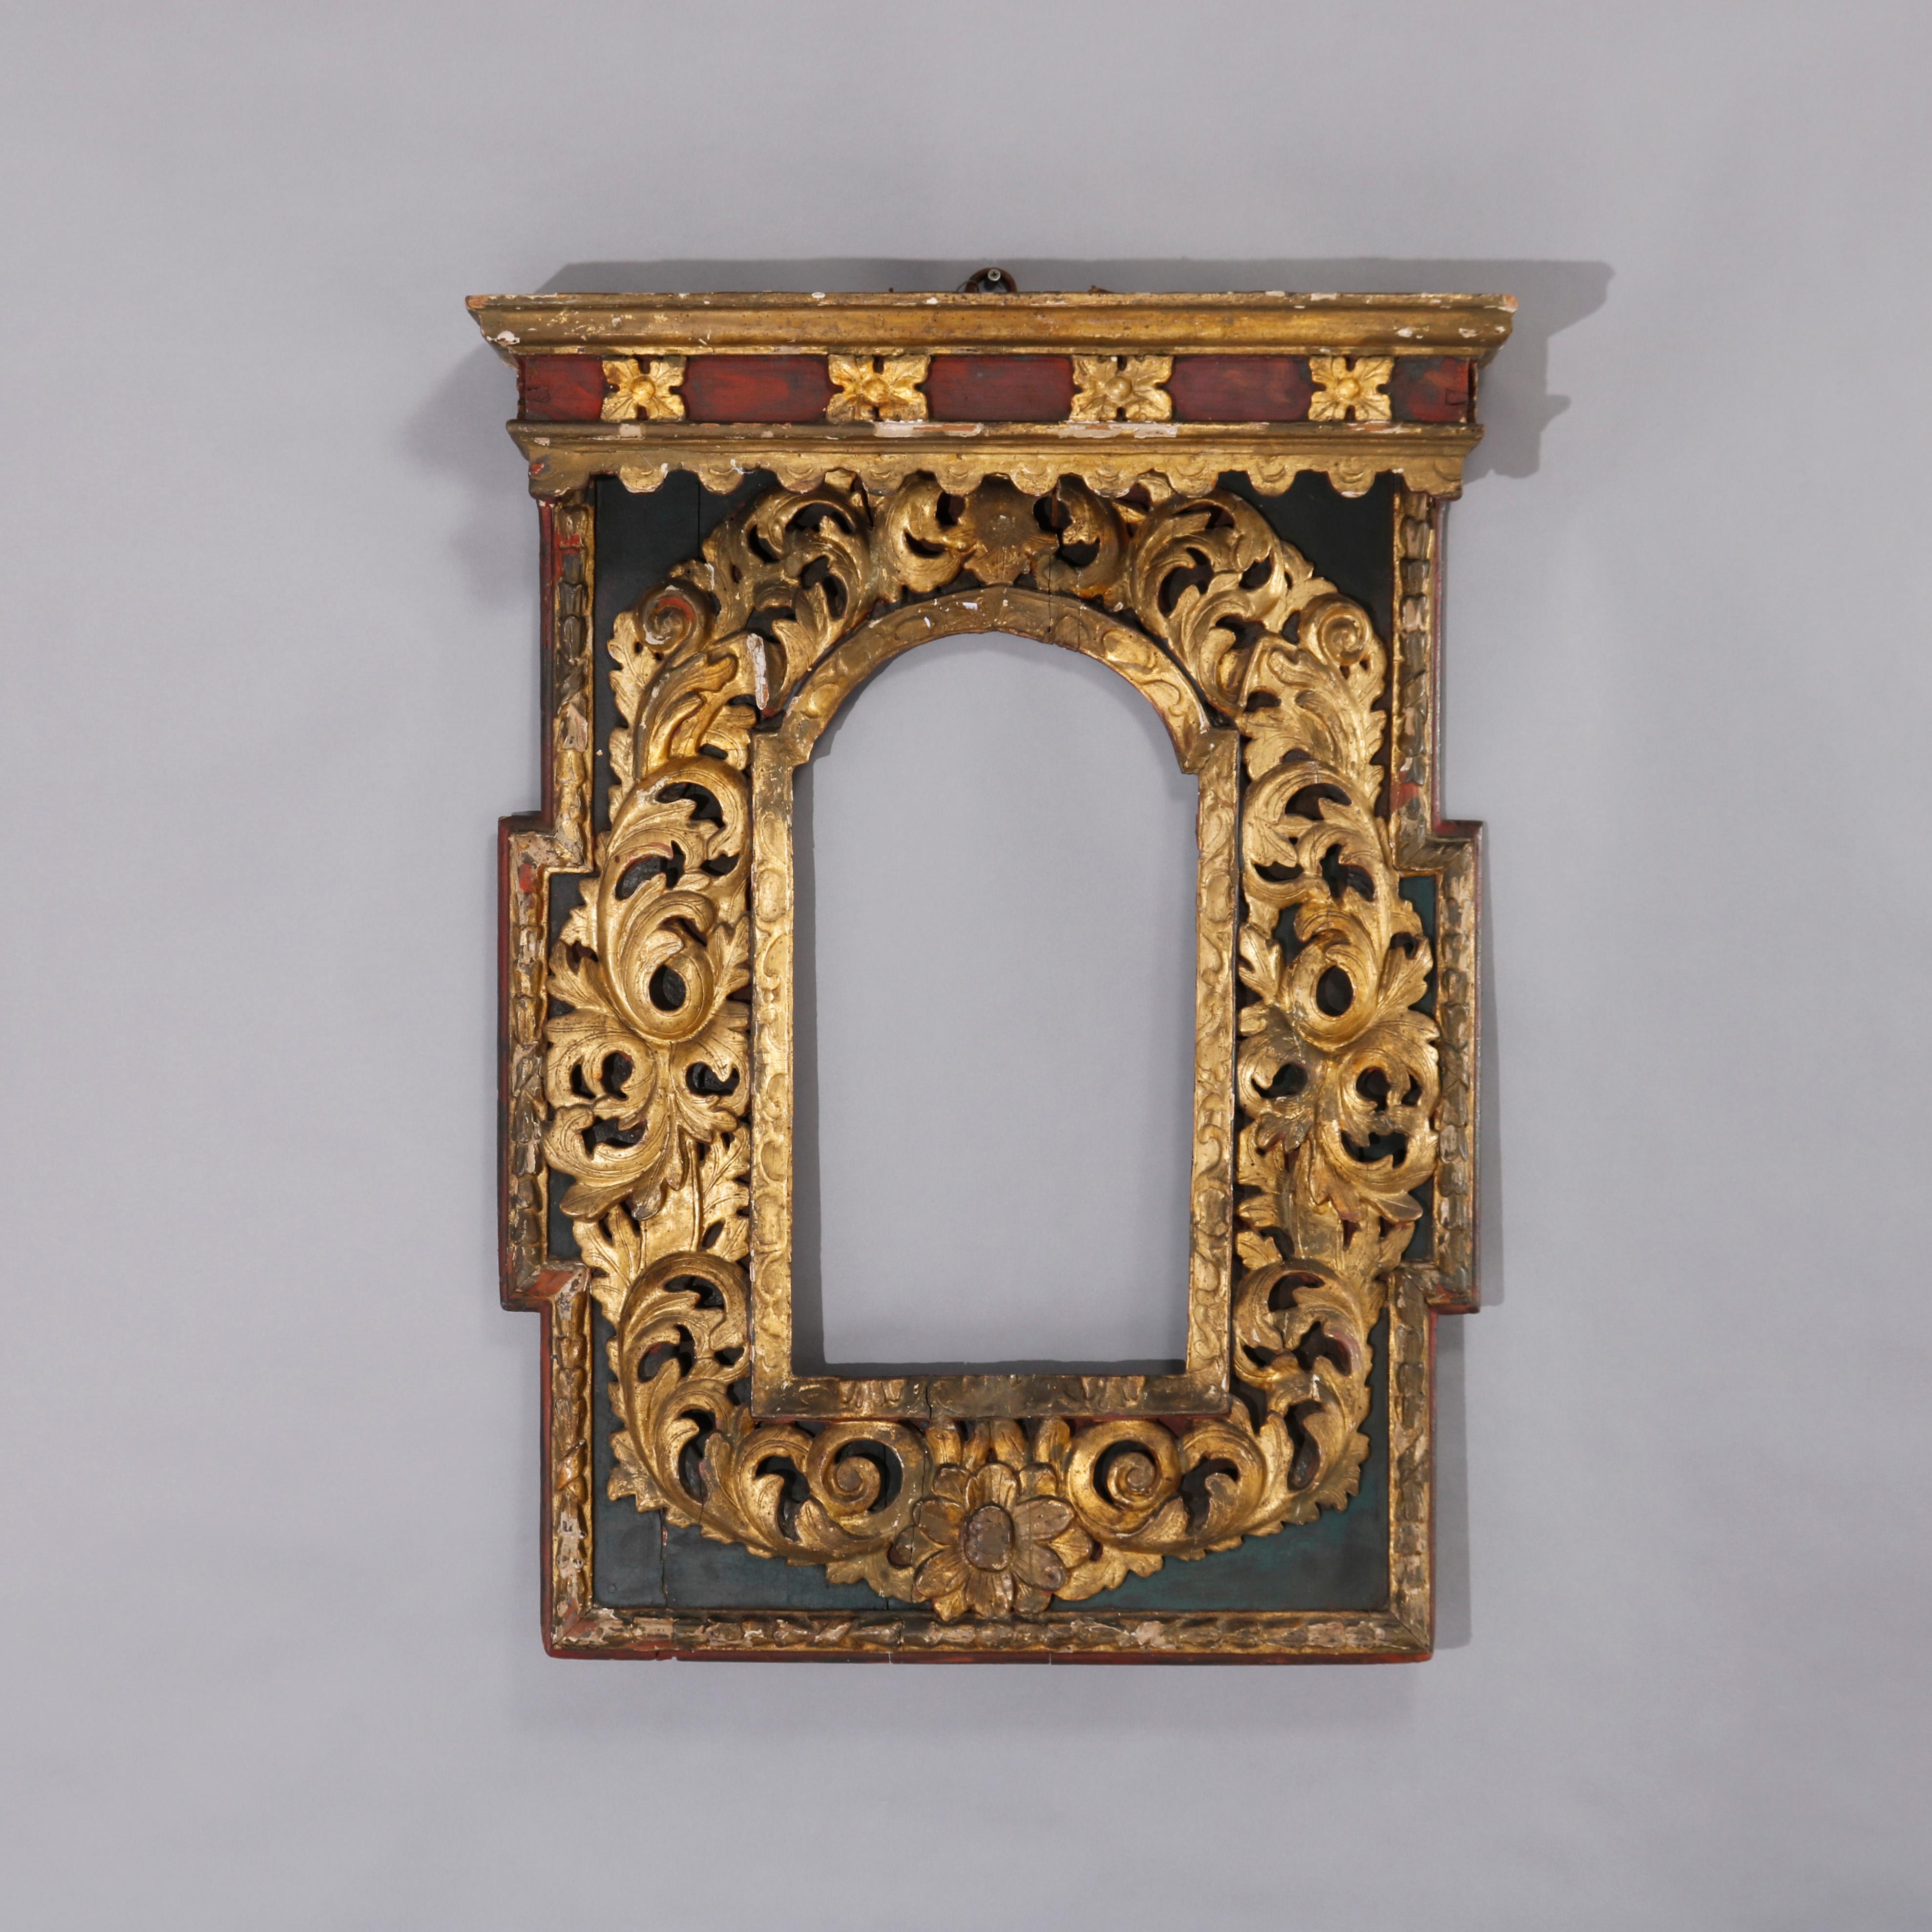 A large antique Italian Renaissance frame offers polychromed wood construction with gilt and deeply carved foliate, scroll and acanthus decoration, 17th or 18th century

Measures - 37.5''H x 27''W x 7''D.